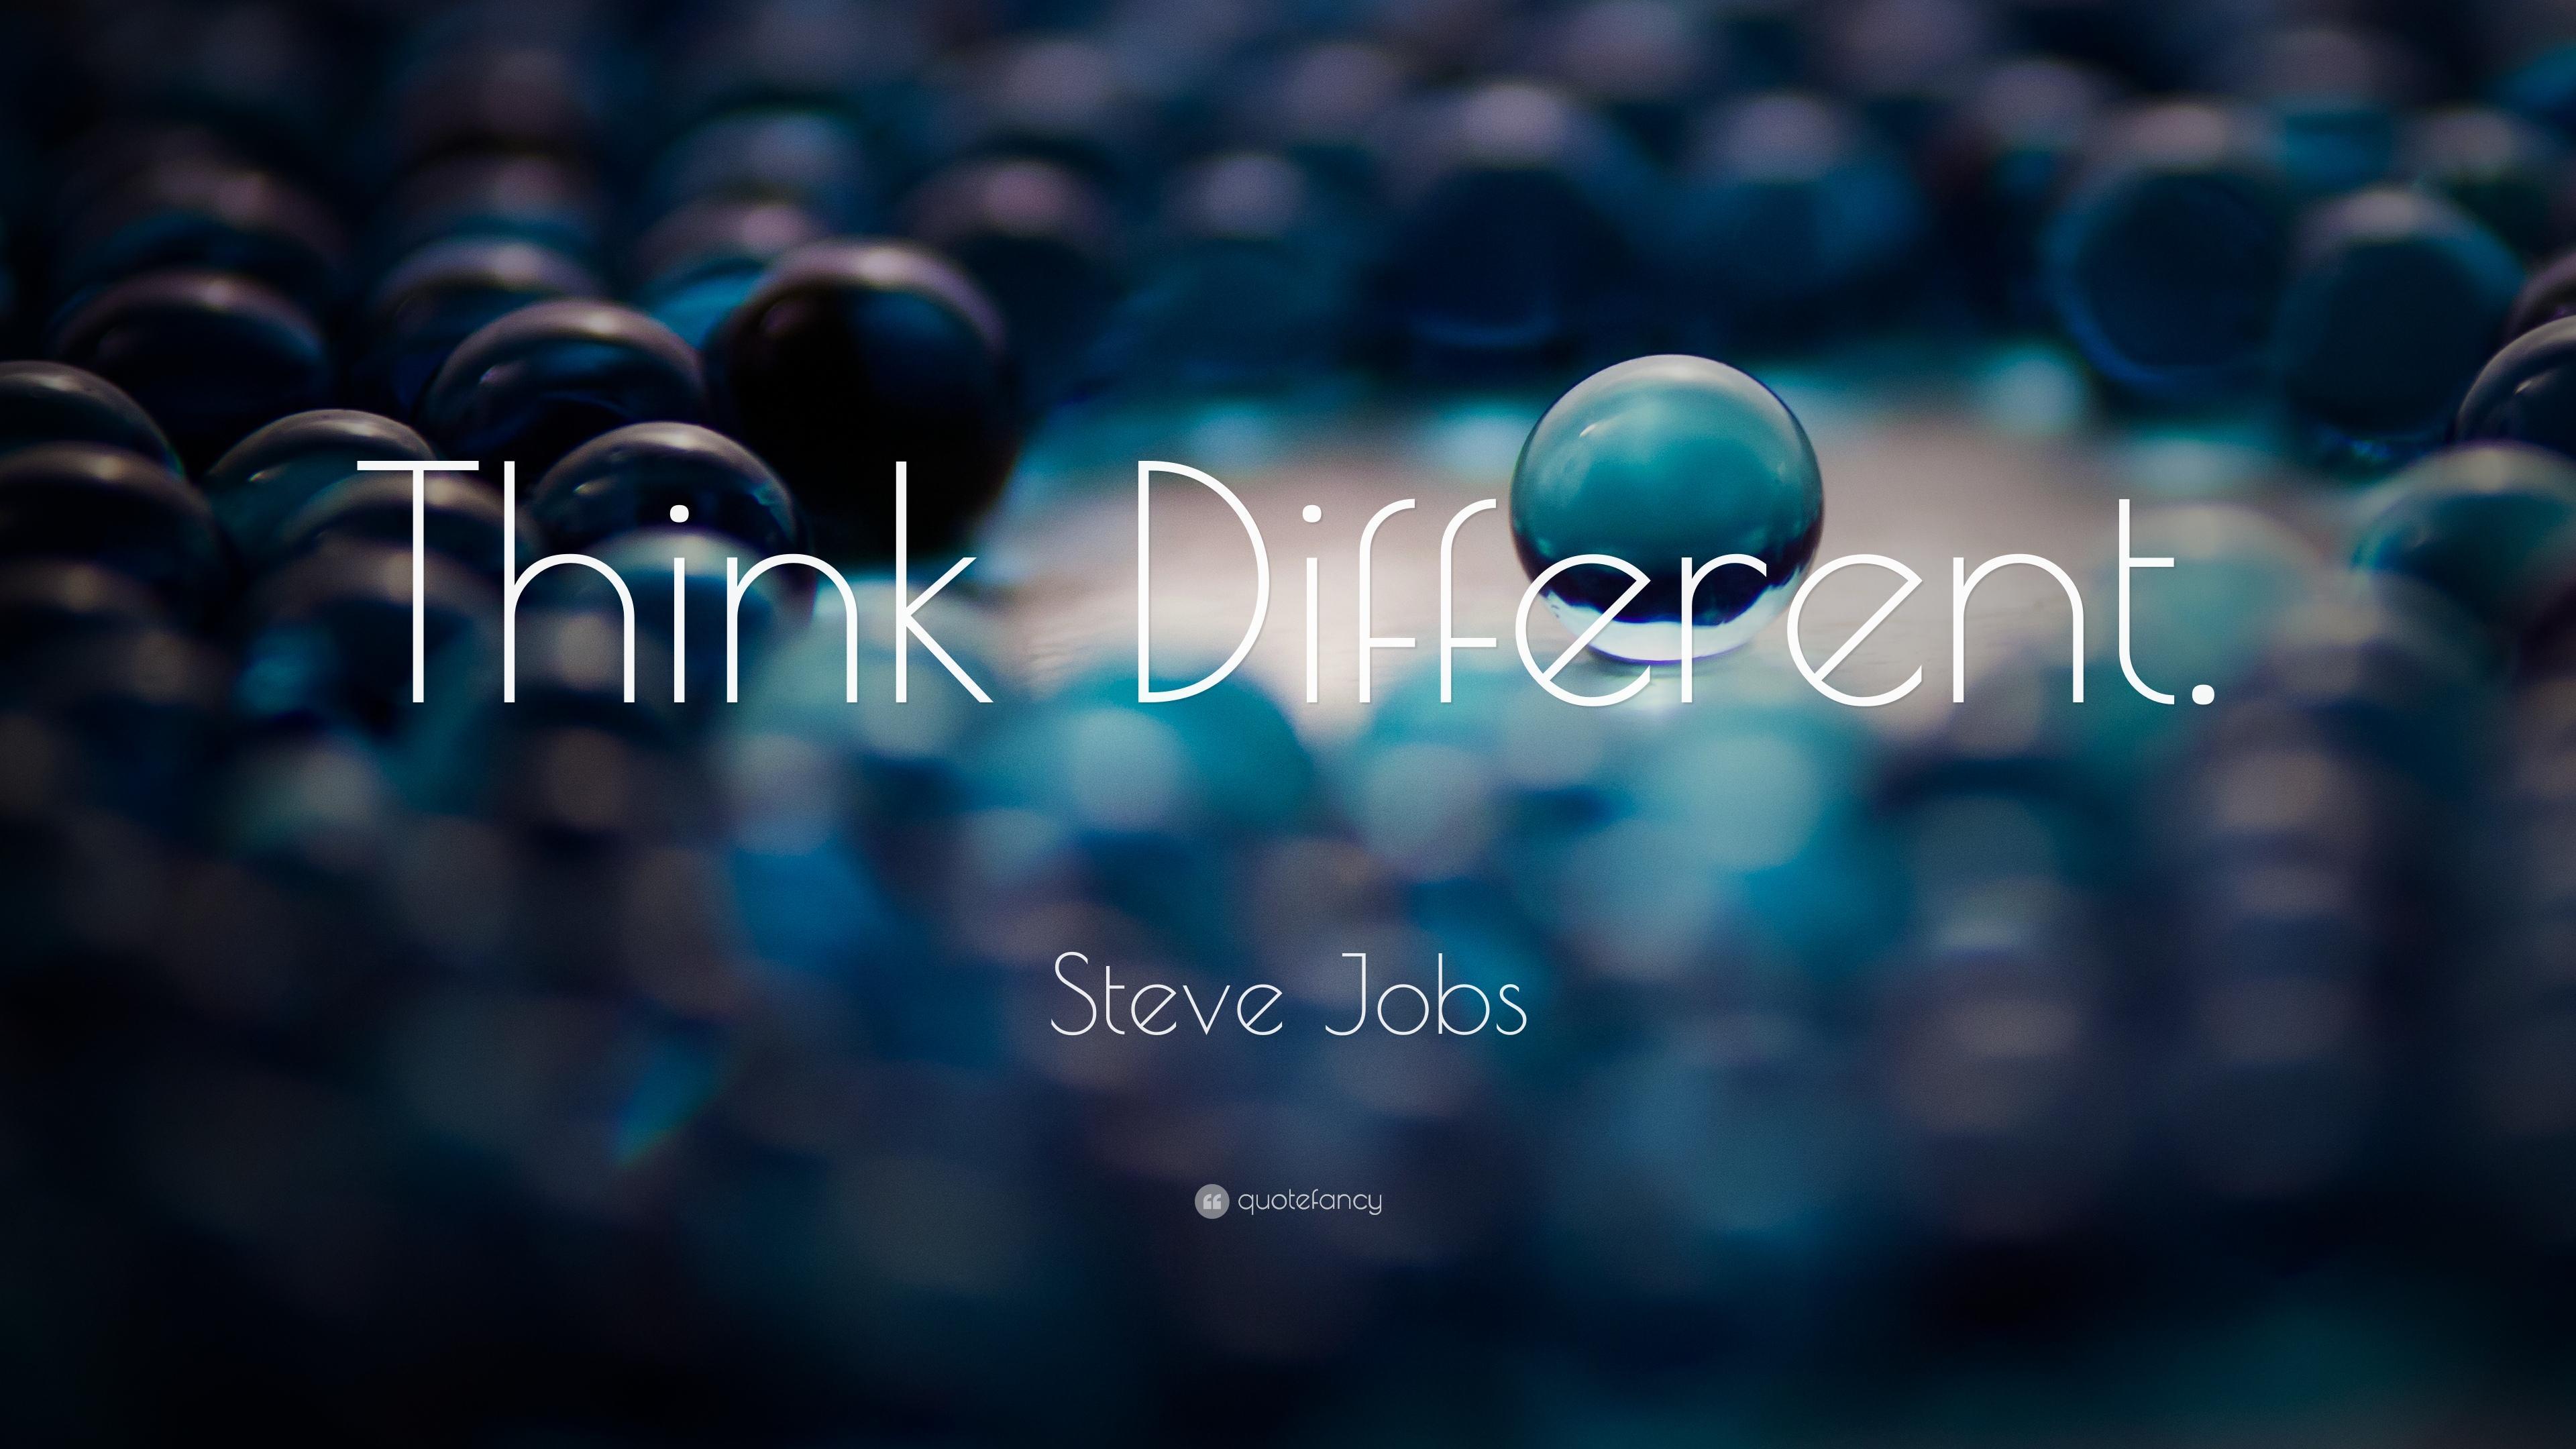 Steve Jobs Quote: “Think Different.” (21 wallpaper)